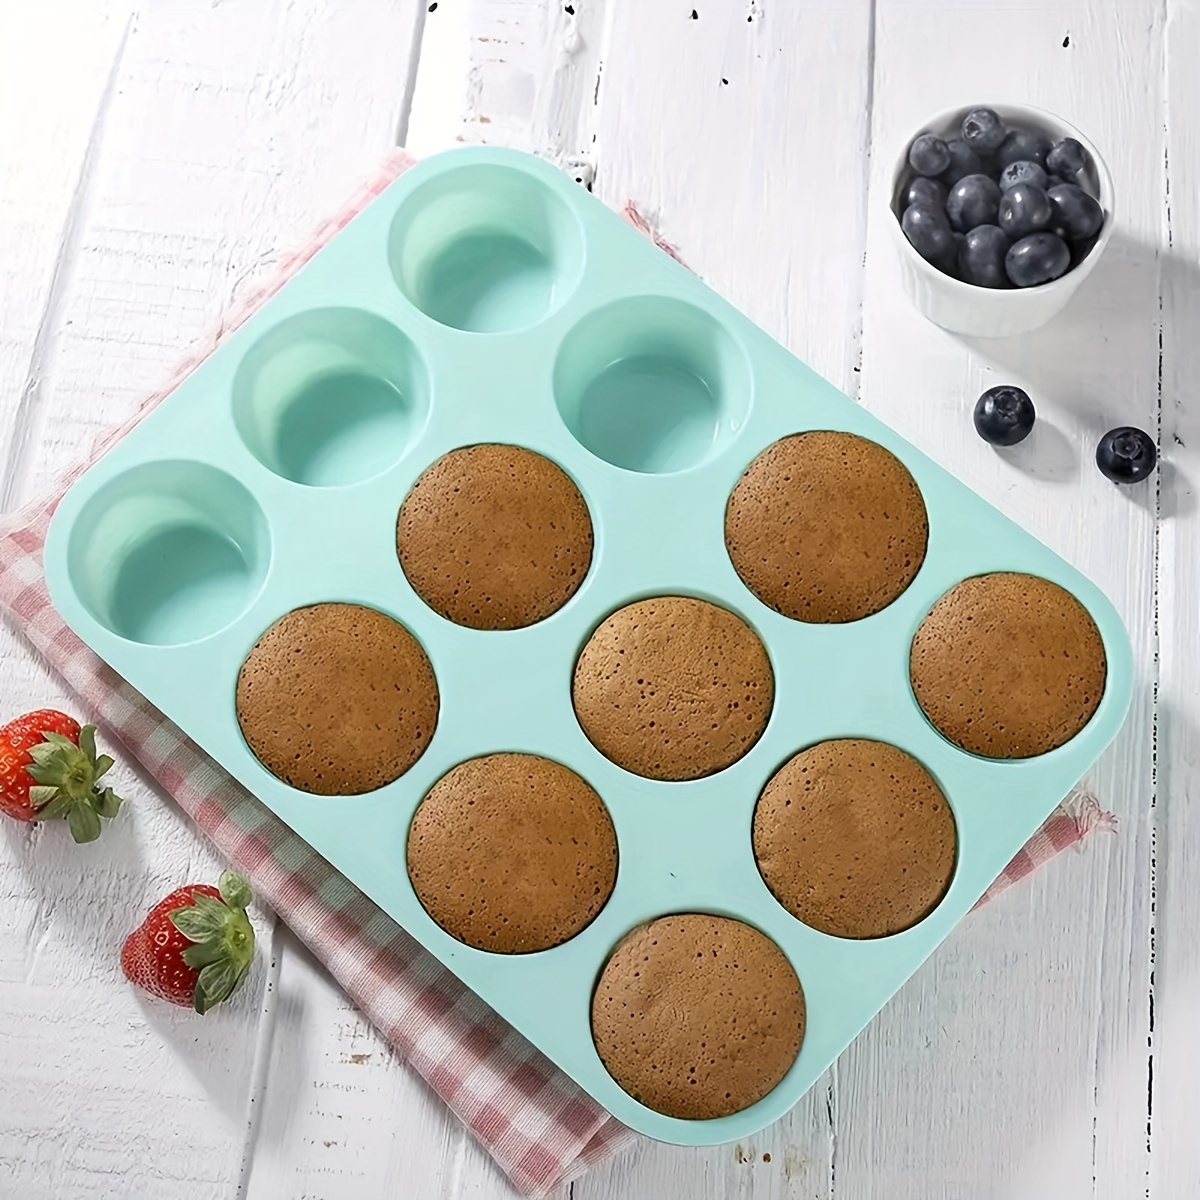 2 pack Non-Stick Silicone Muffin Top Pan and Egg Molds - 7.6cm Round, 6  Cavity Whoopie Pie Pans for Baking Muffins, Eggs, Tarts, Corn Bread - Easy  Rel